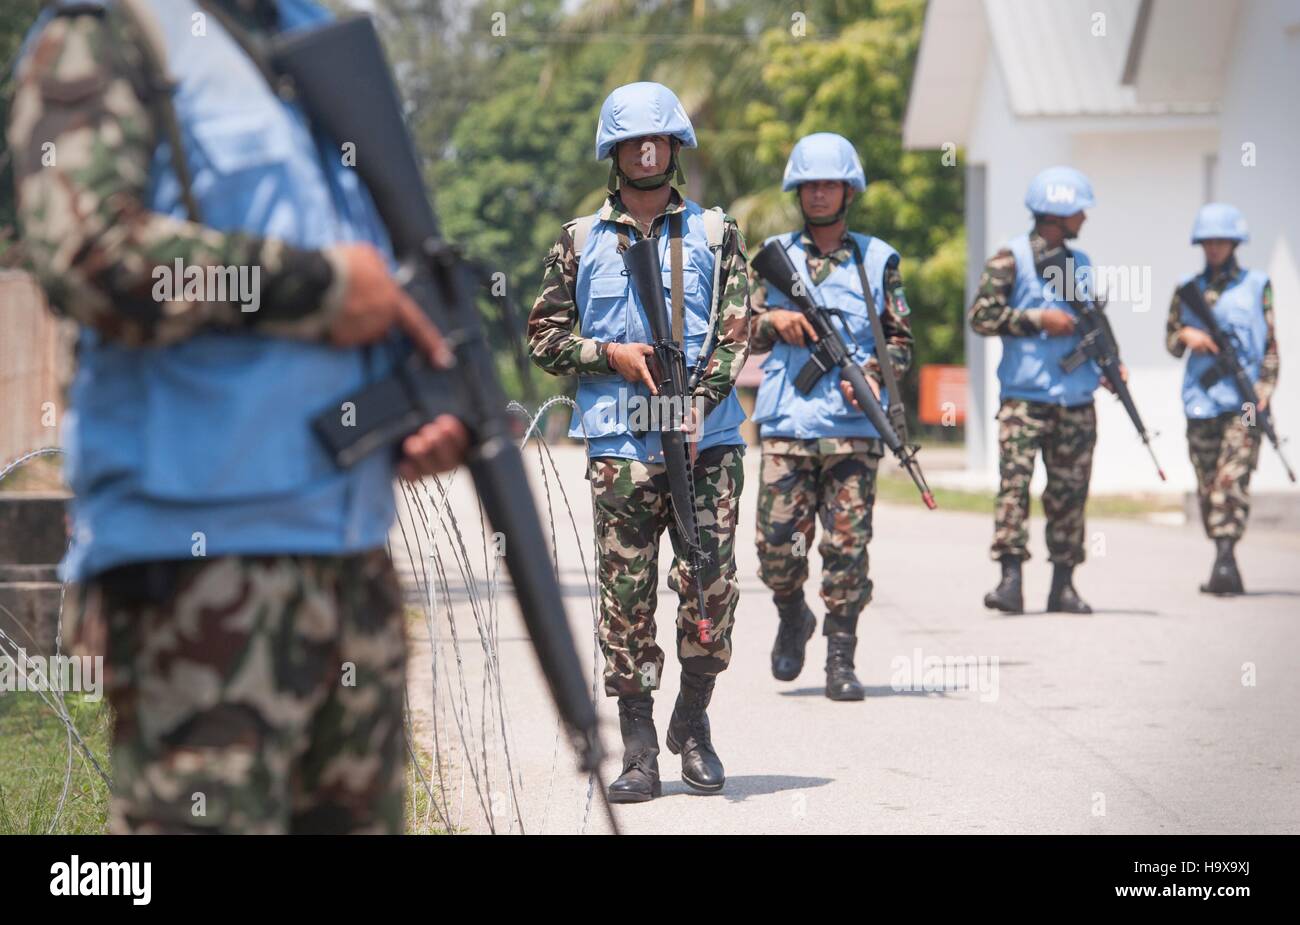 Nepalese soldiers provide security during peacekeeping training at a simulated UN site during Exercise Keris Aman at Segenting Camp August 15, 2015 in Port Dickson, Malaysia. Stock Photo